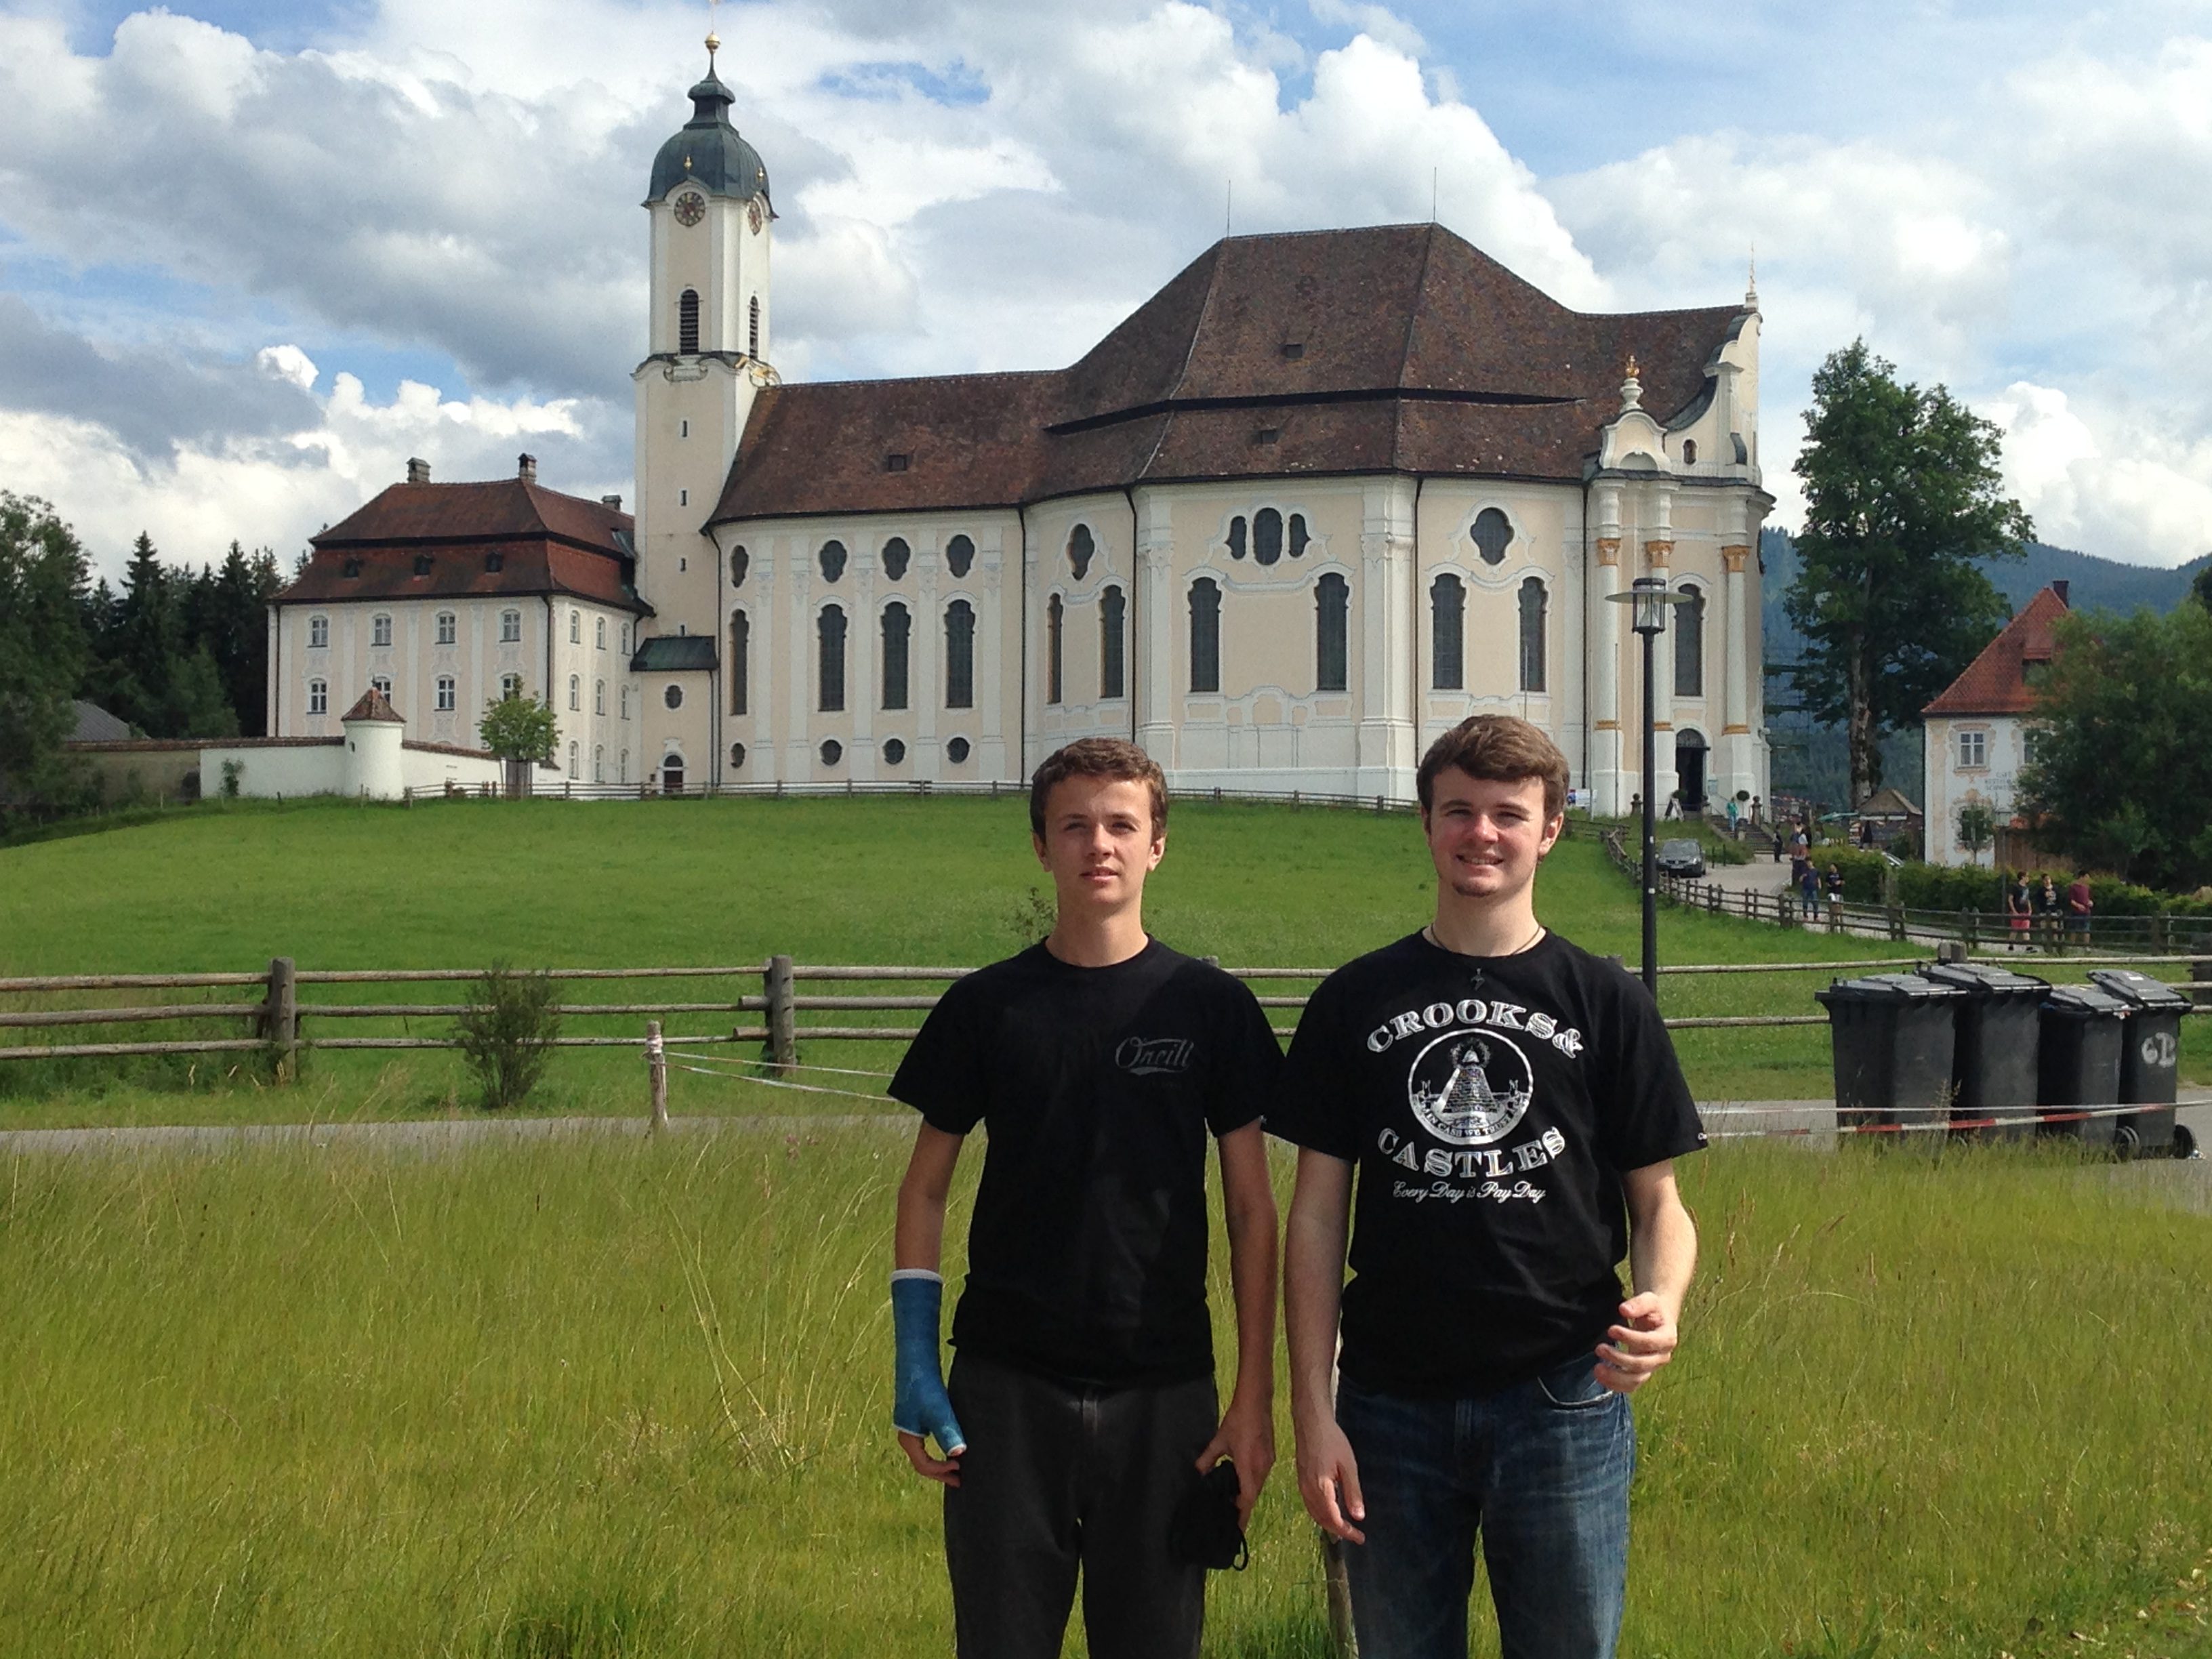 Gavin and Riley in front of the Wies Kirche in Bavaria